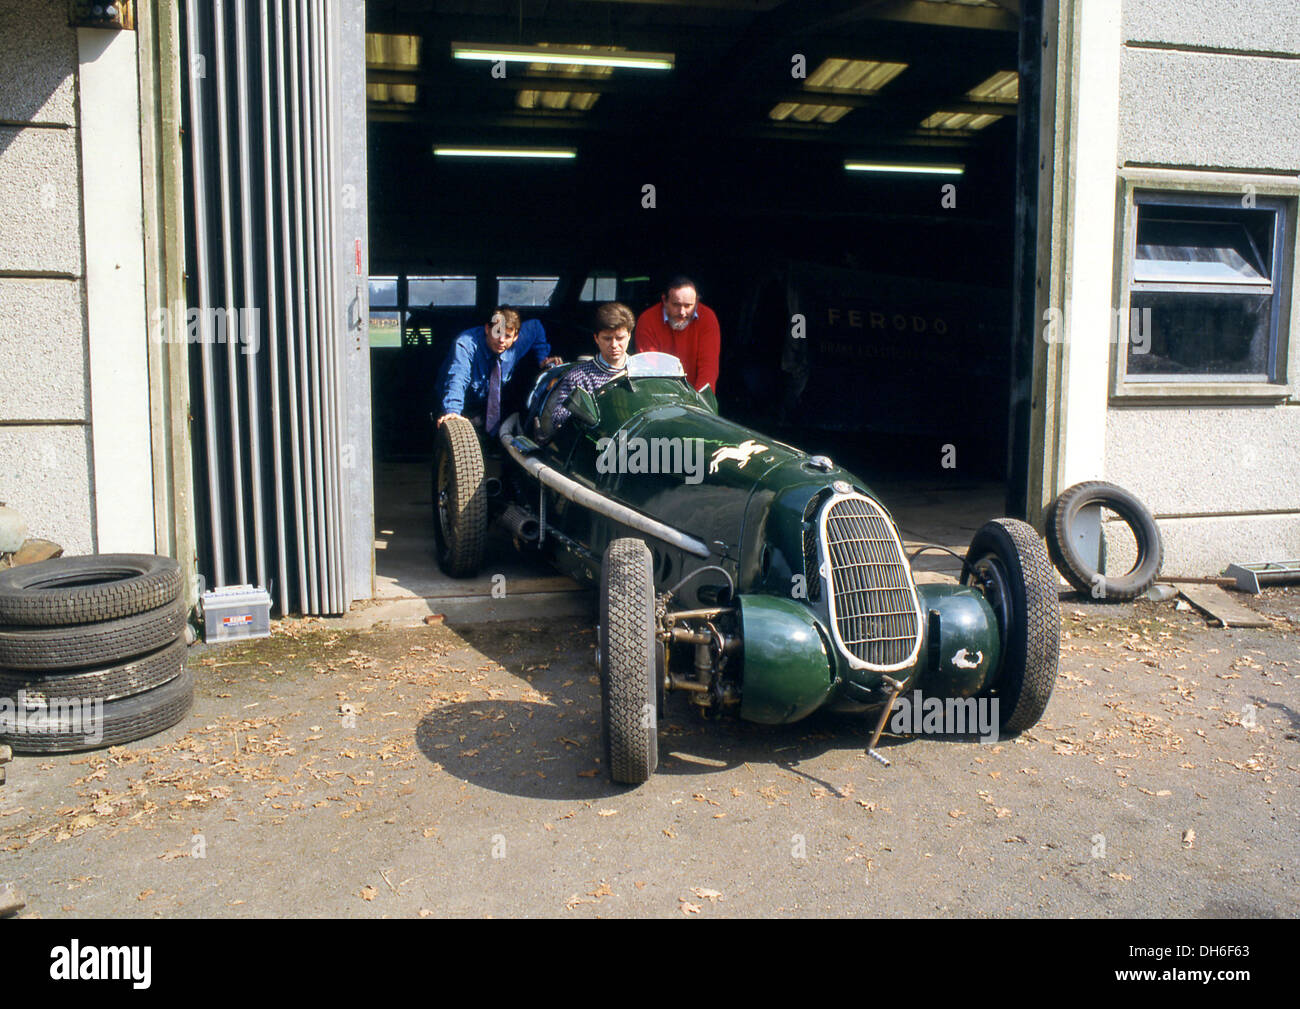 Mark Beattie and Doug Nye of Christie's, Mick Walsh of Classic and Sport Car with Alfa Romeo 8C-35, in storage since 1955. 1988. Stock Photo